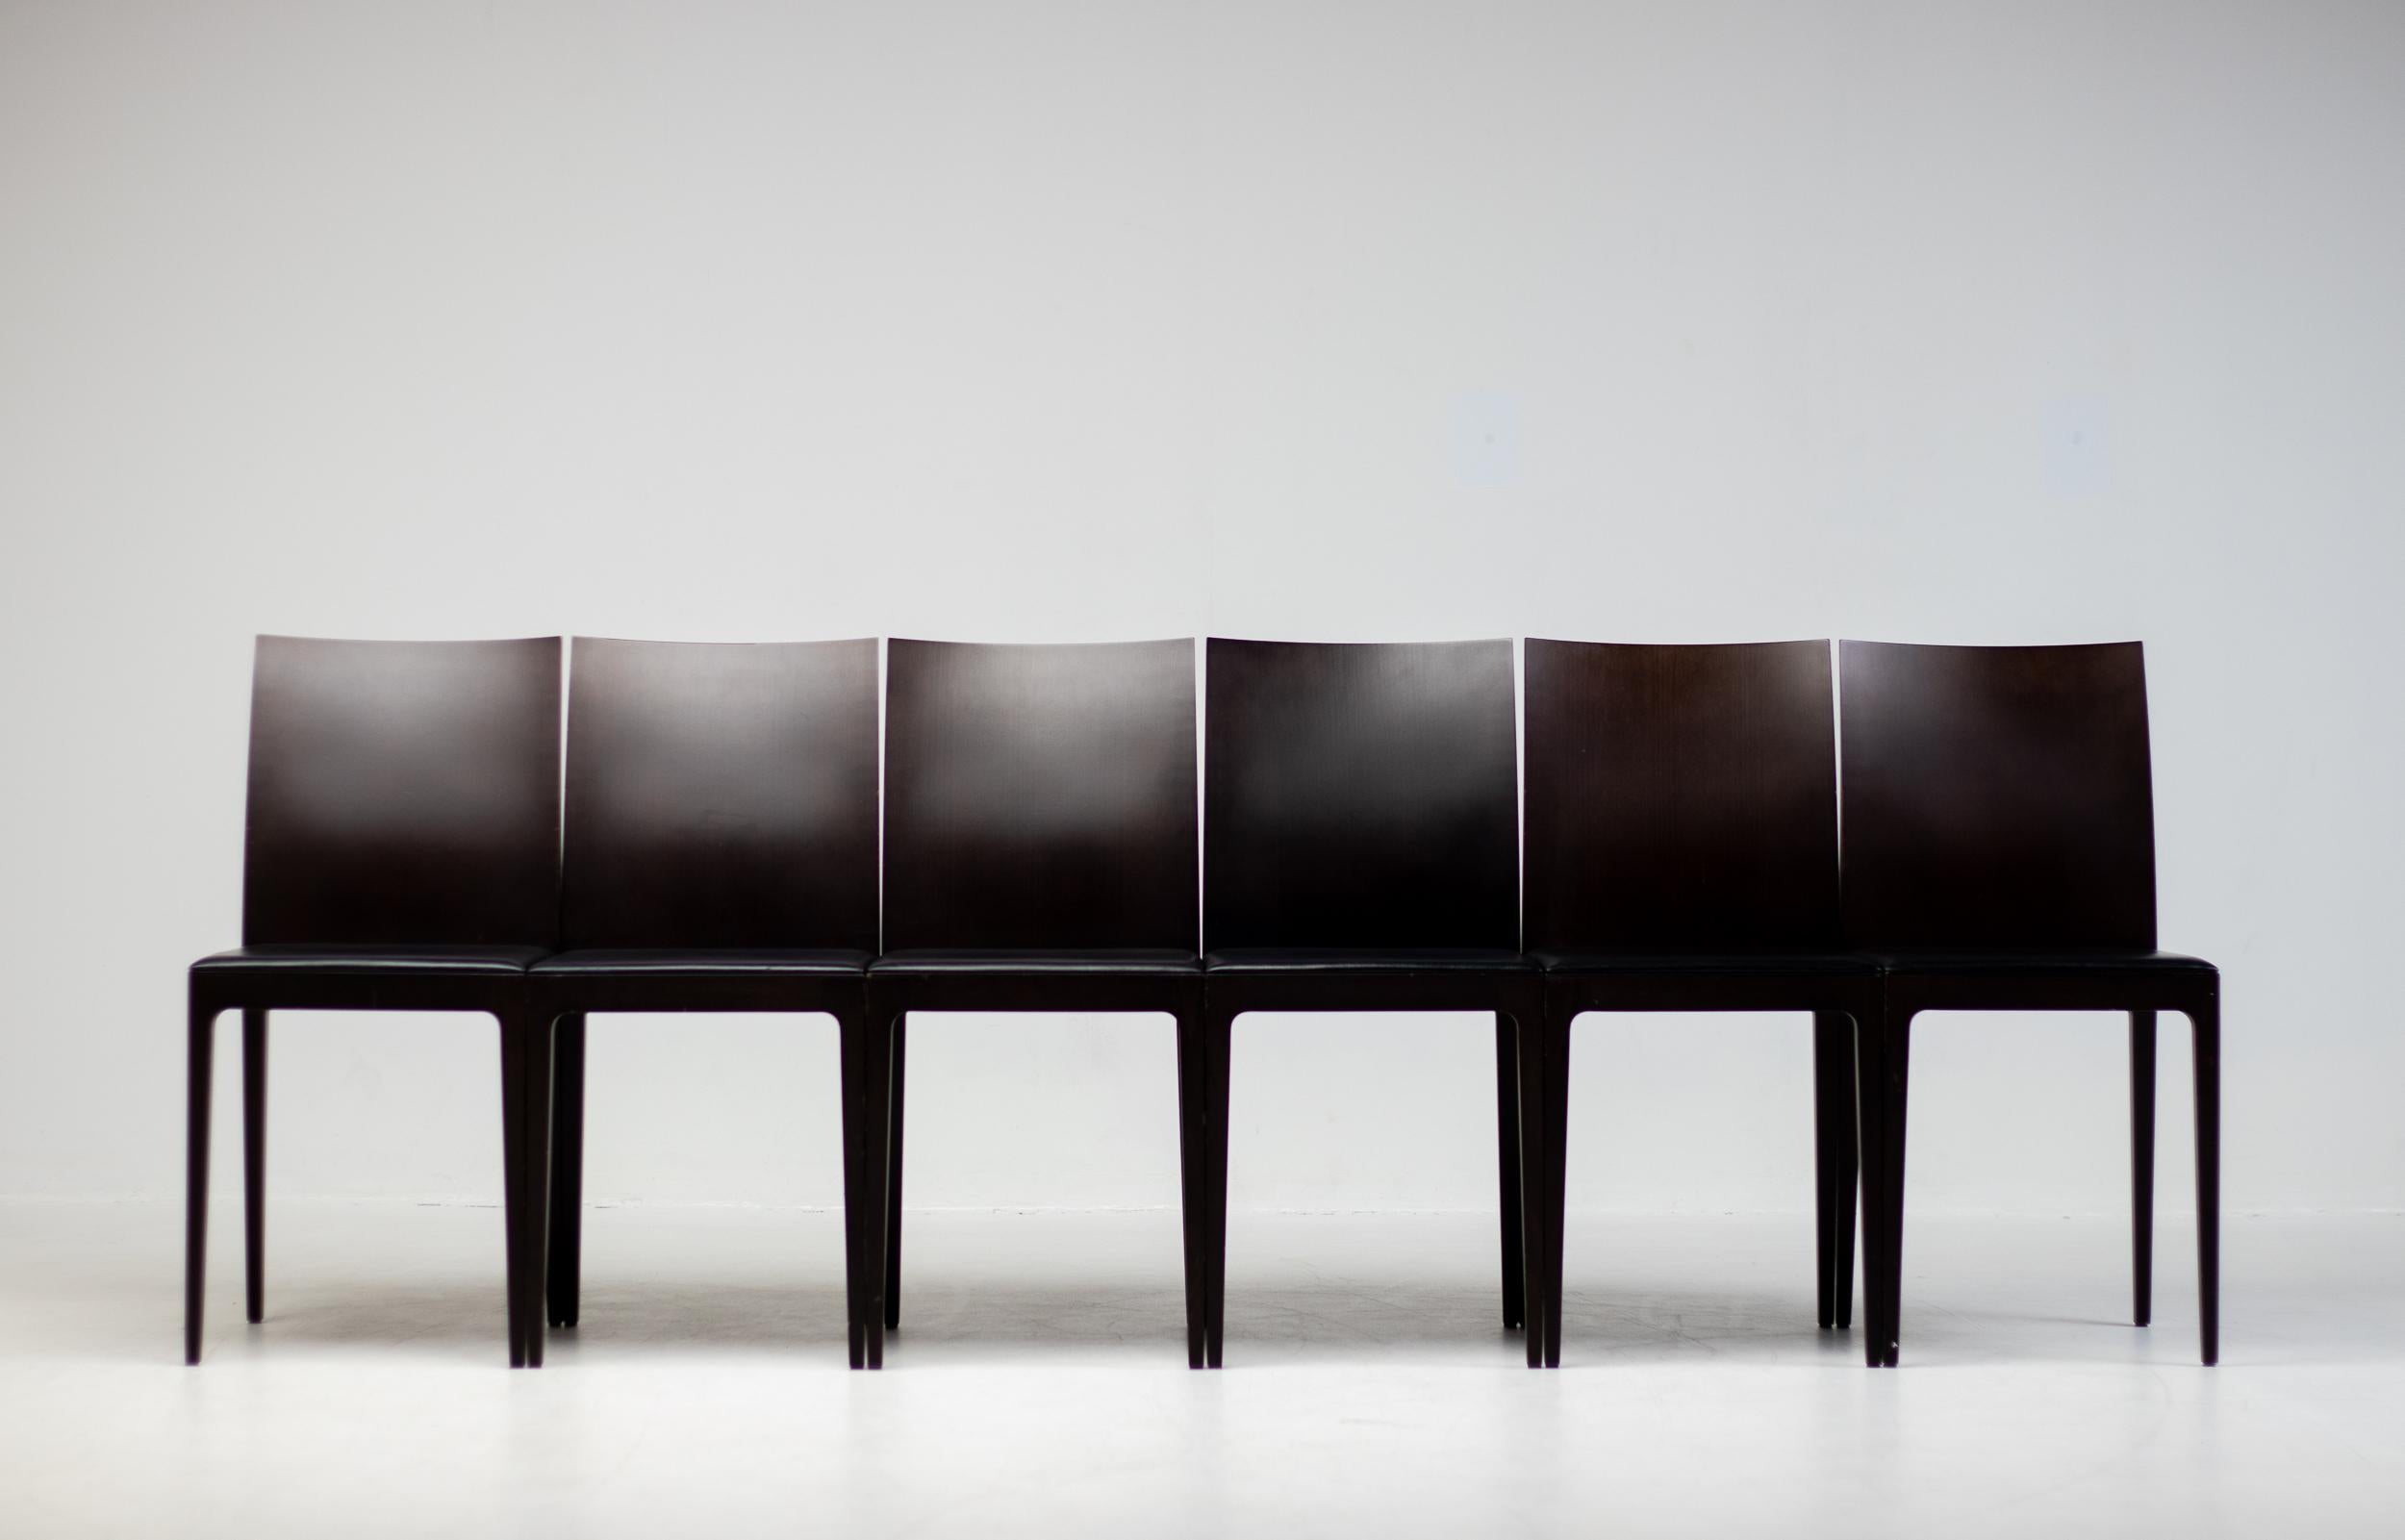 A set of six Anna R dining chairs designed by Ludovica and Roberto Palomba for Crassevig, Italy. 
These chairs feature a dark brown solid wood frame with double-paneled back and a seat panel upholstered in black leather. Marked Crassevig made in